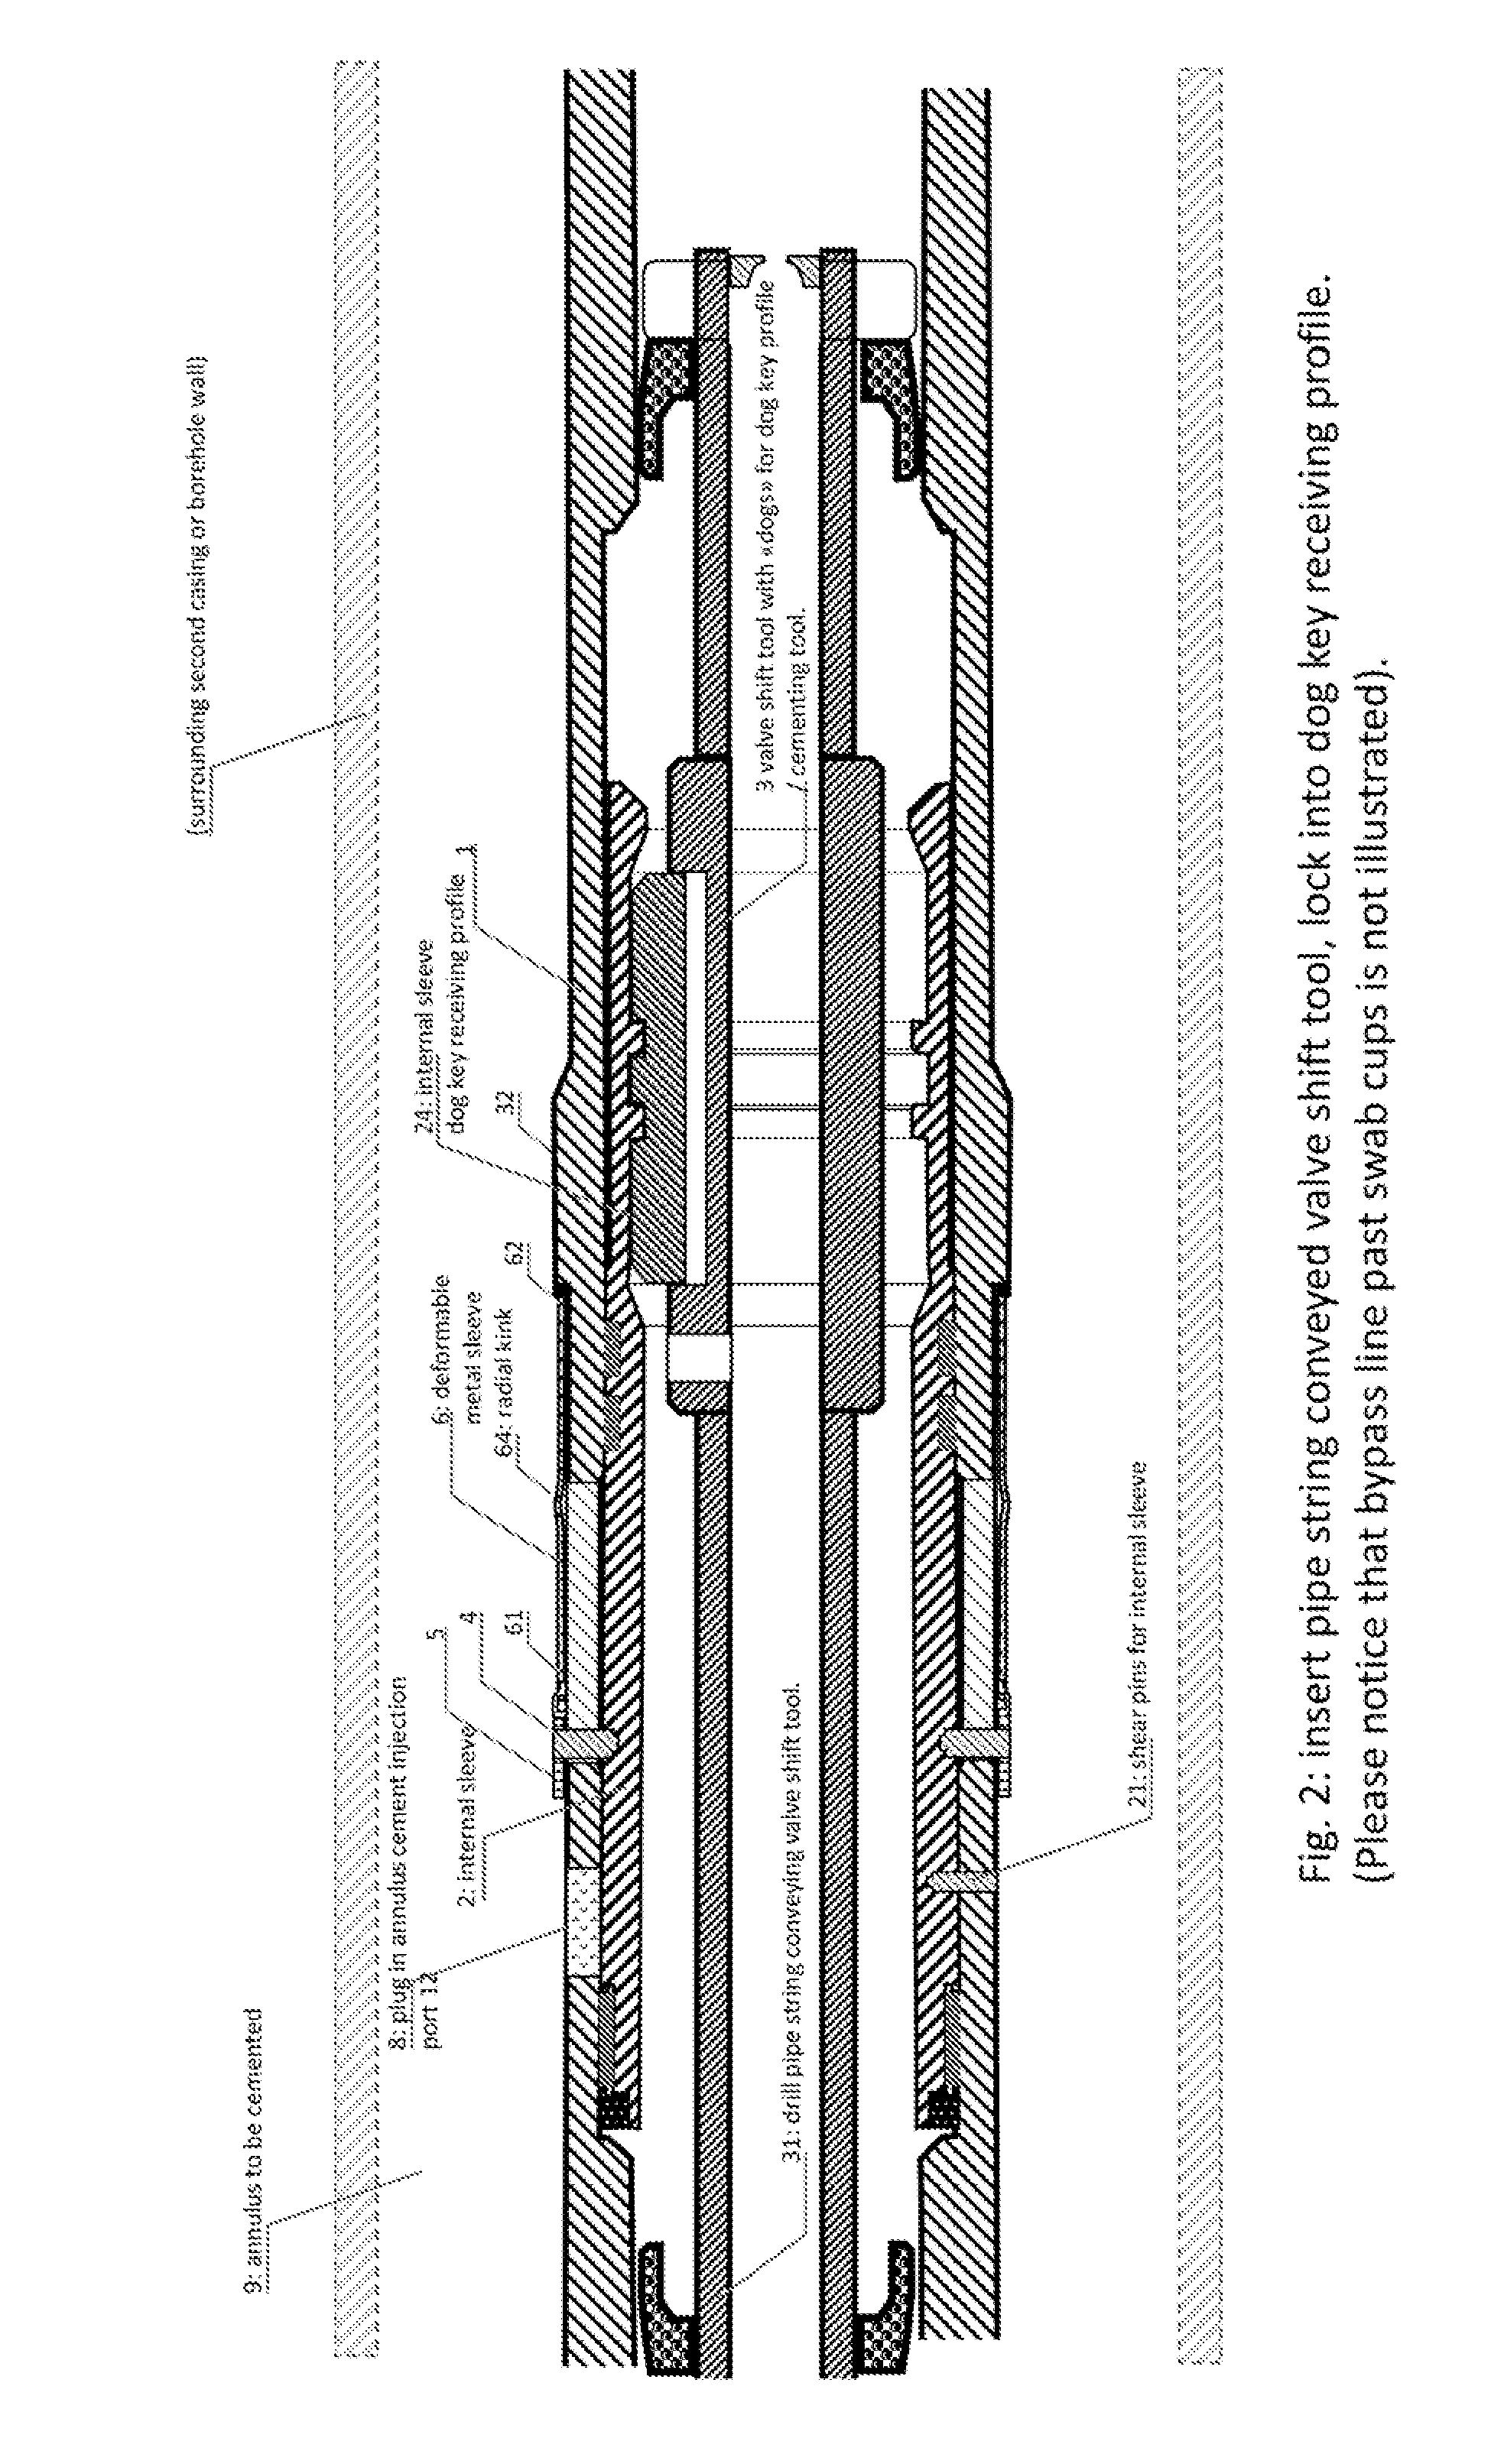 Casing annulus cement foundation system and a method for forming a flange collar constituting a cement foundation